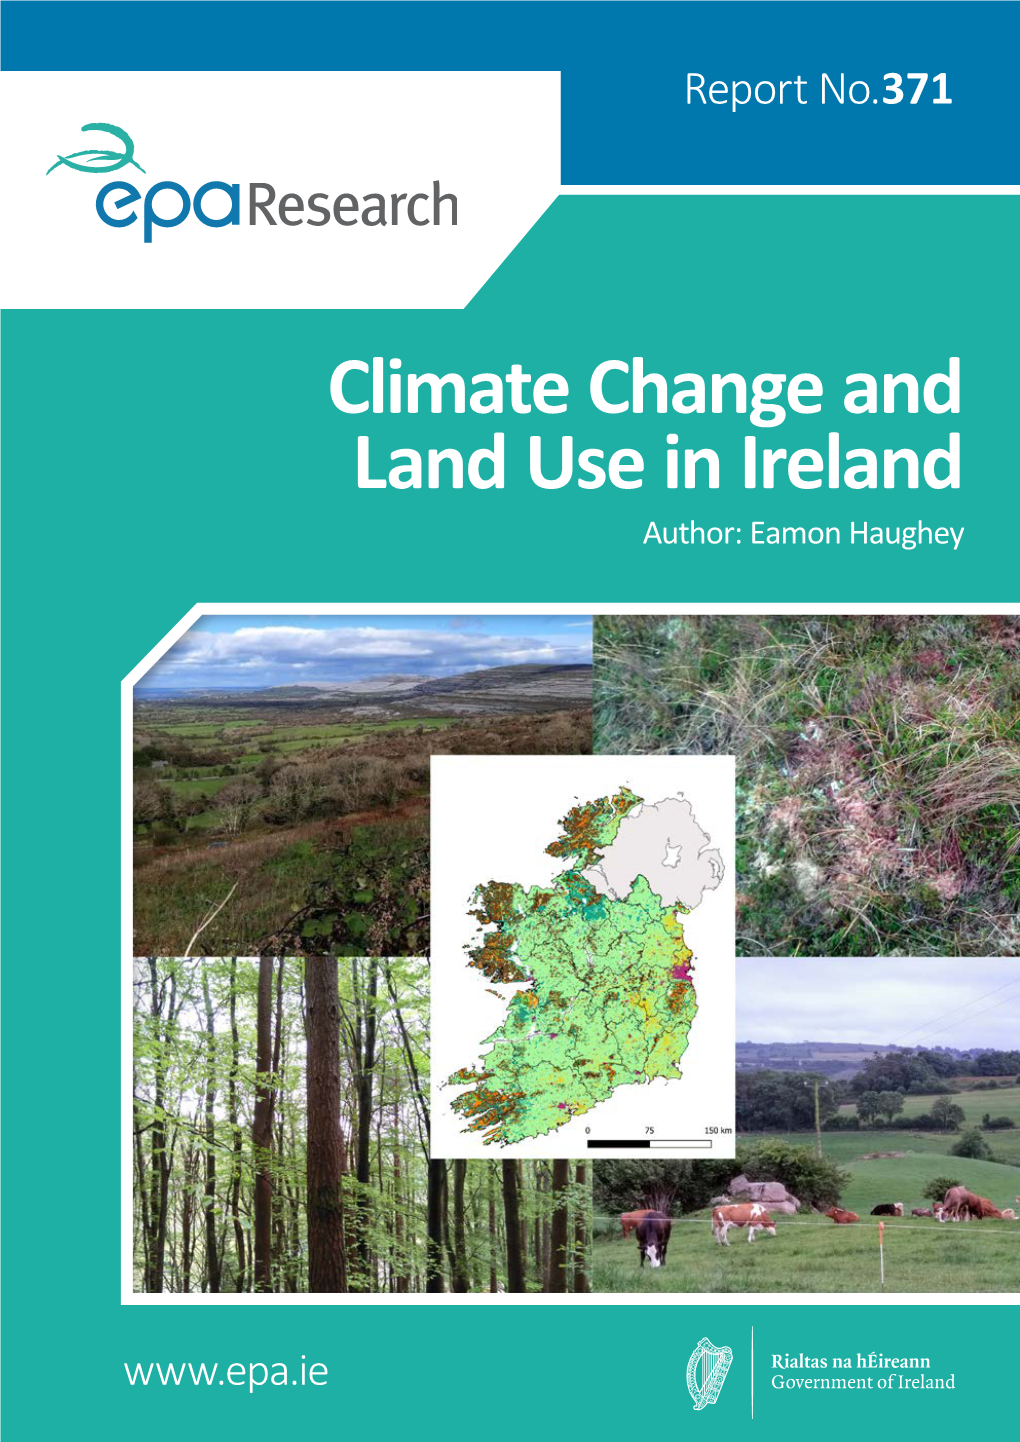 Climate Change and Land Use in Ireland Author: Eamon Haughey